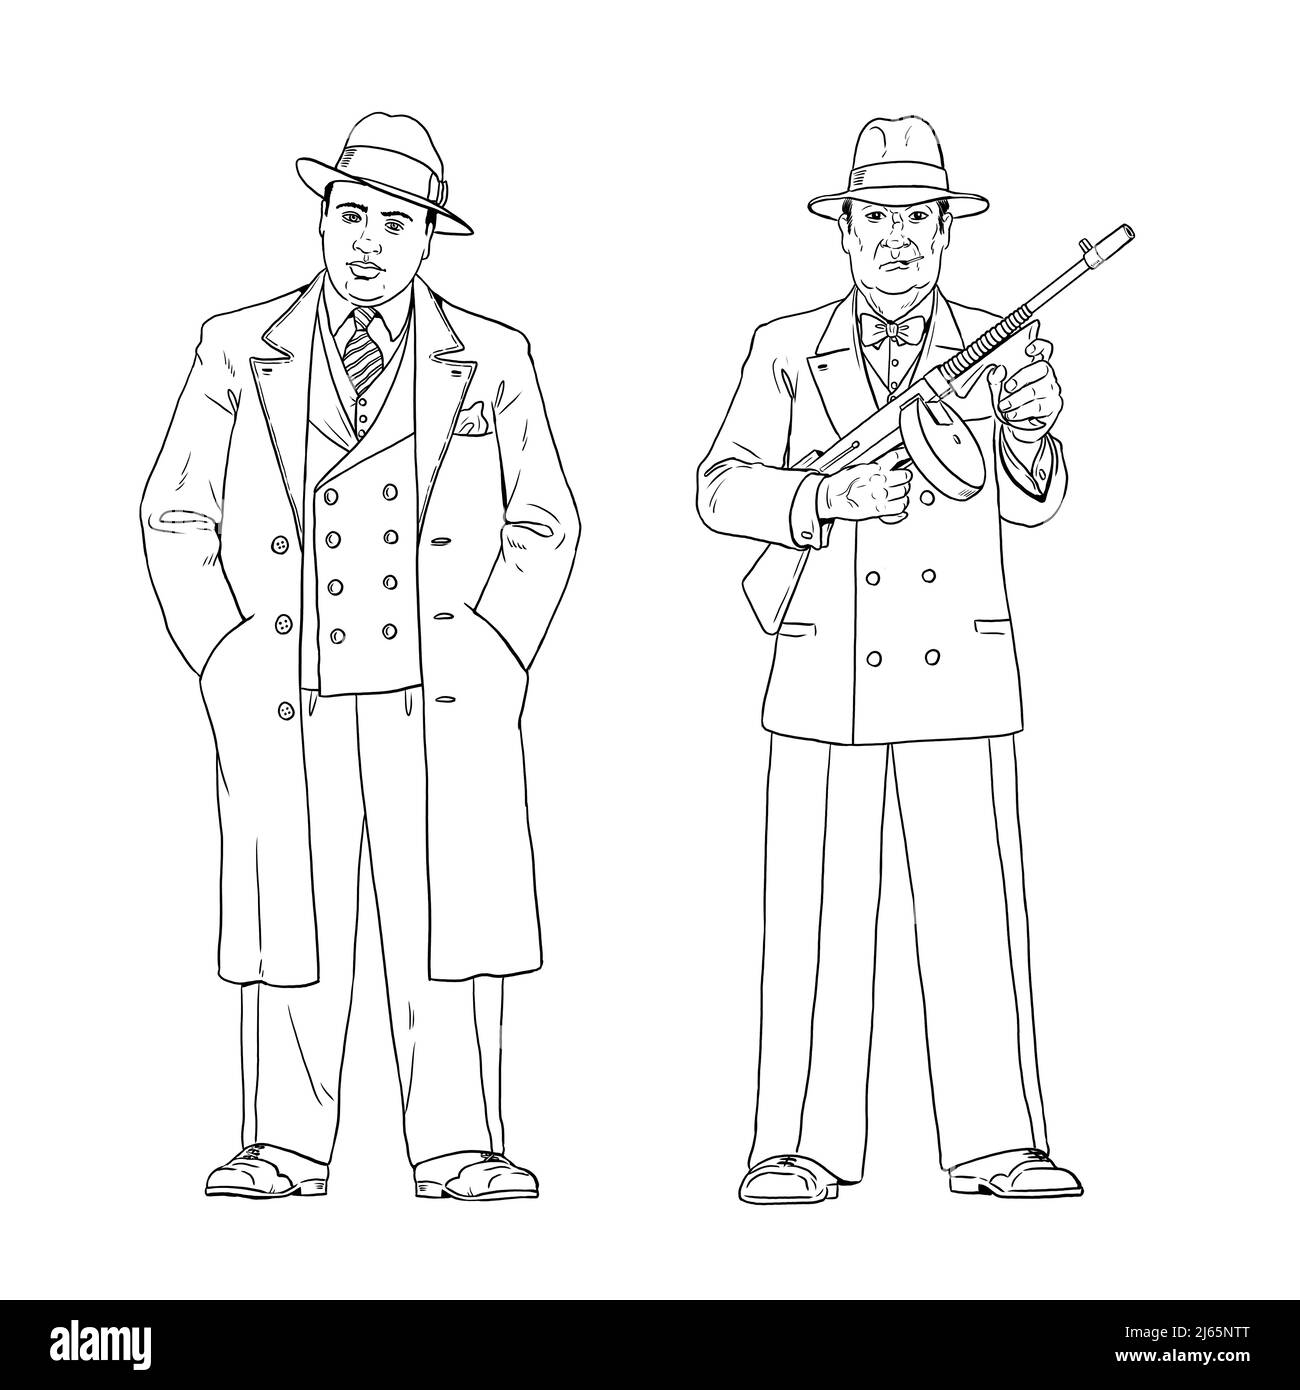 Mafia boss Al Capone with his bodyguard. Gangsters from the 1920s drawing. Stock Photo